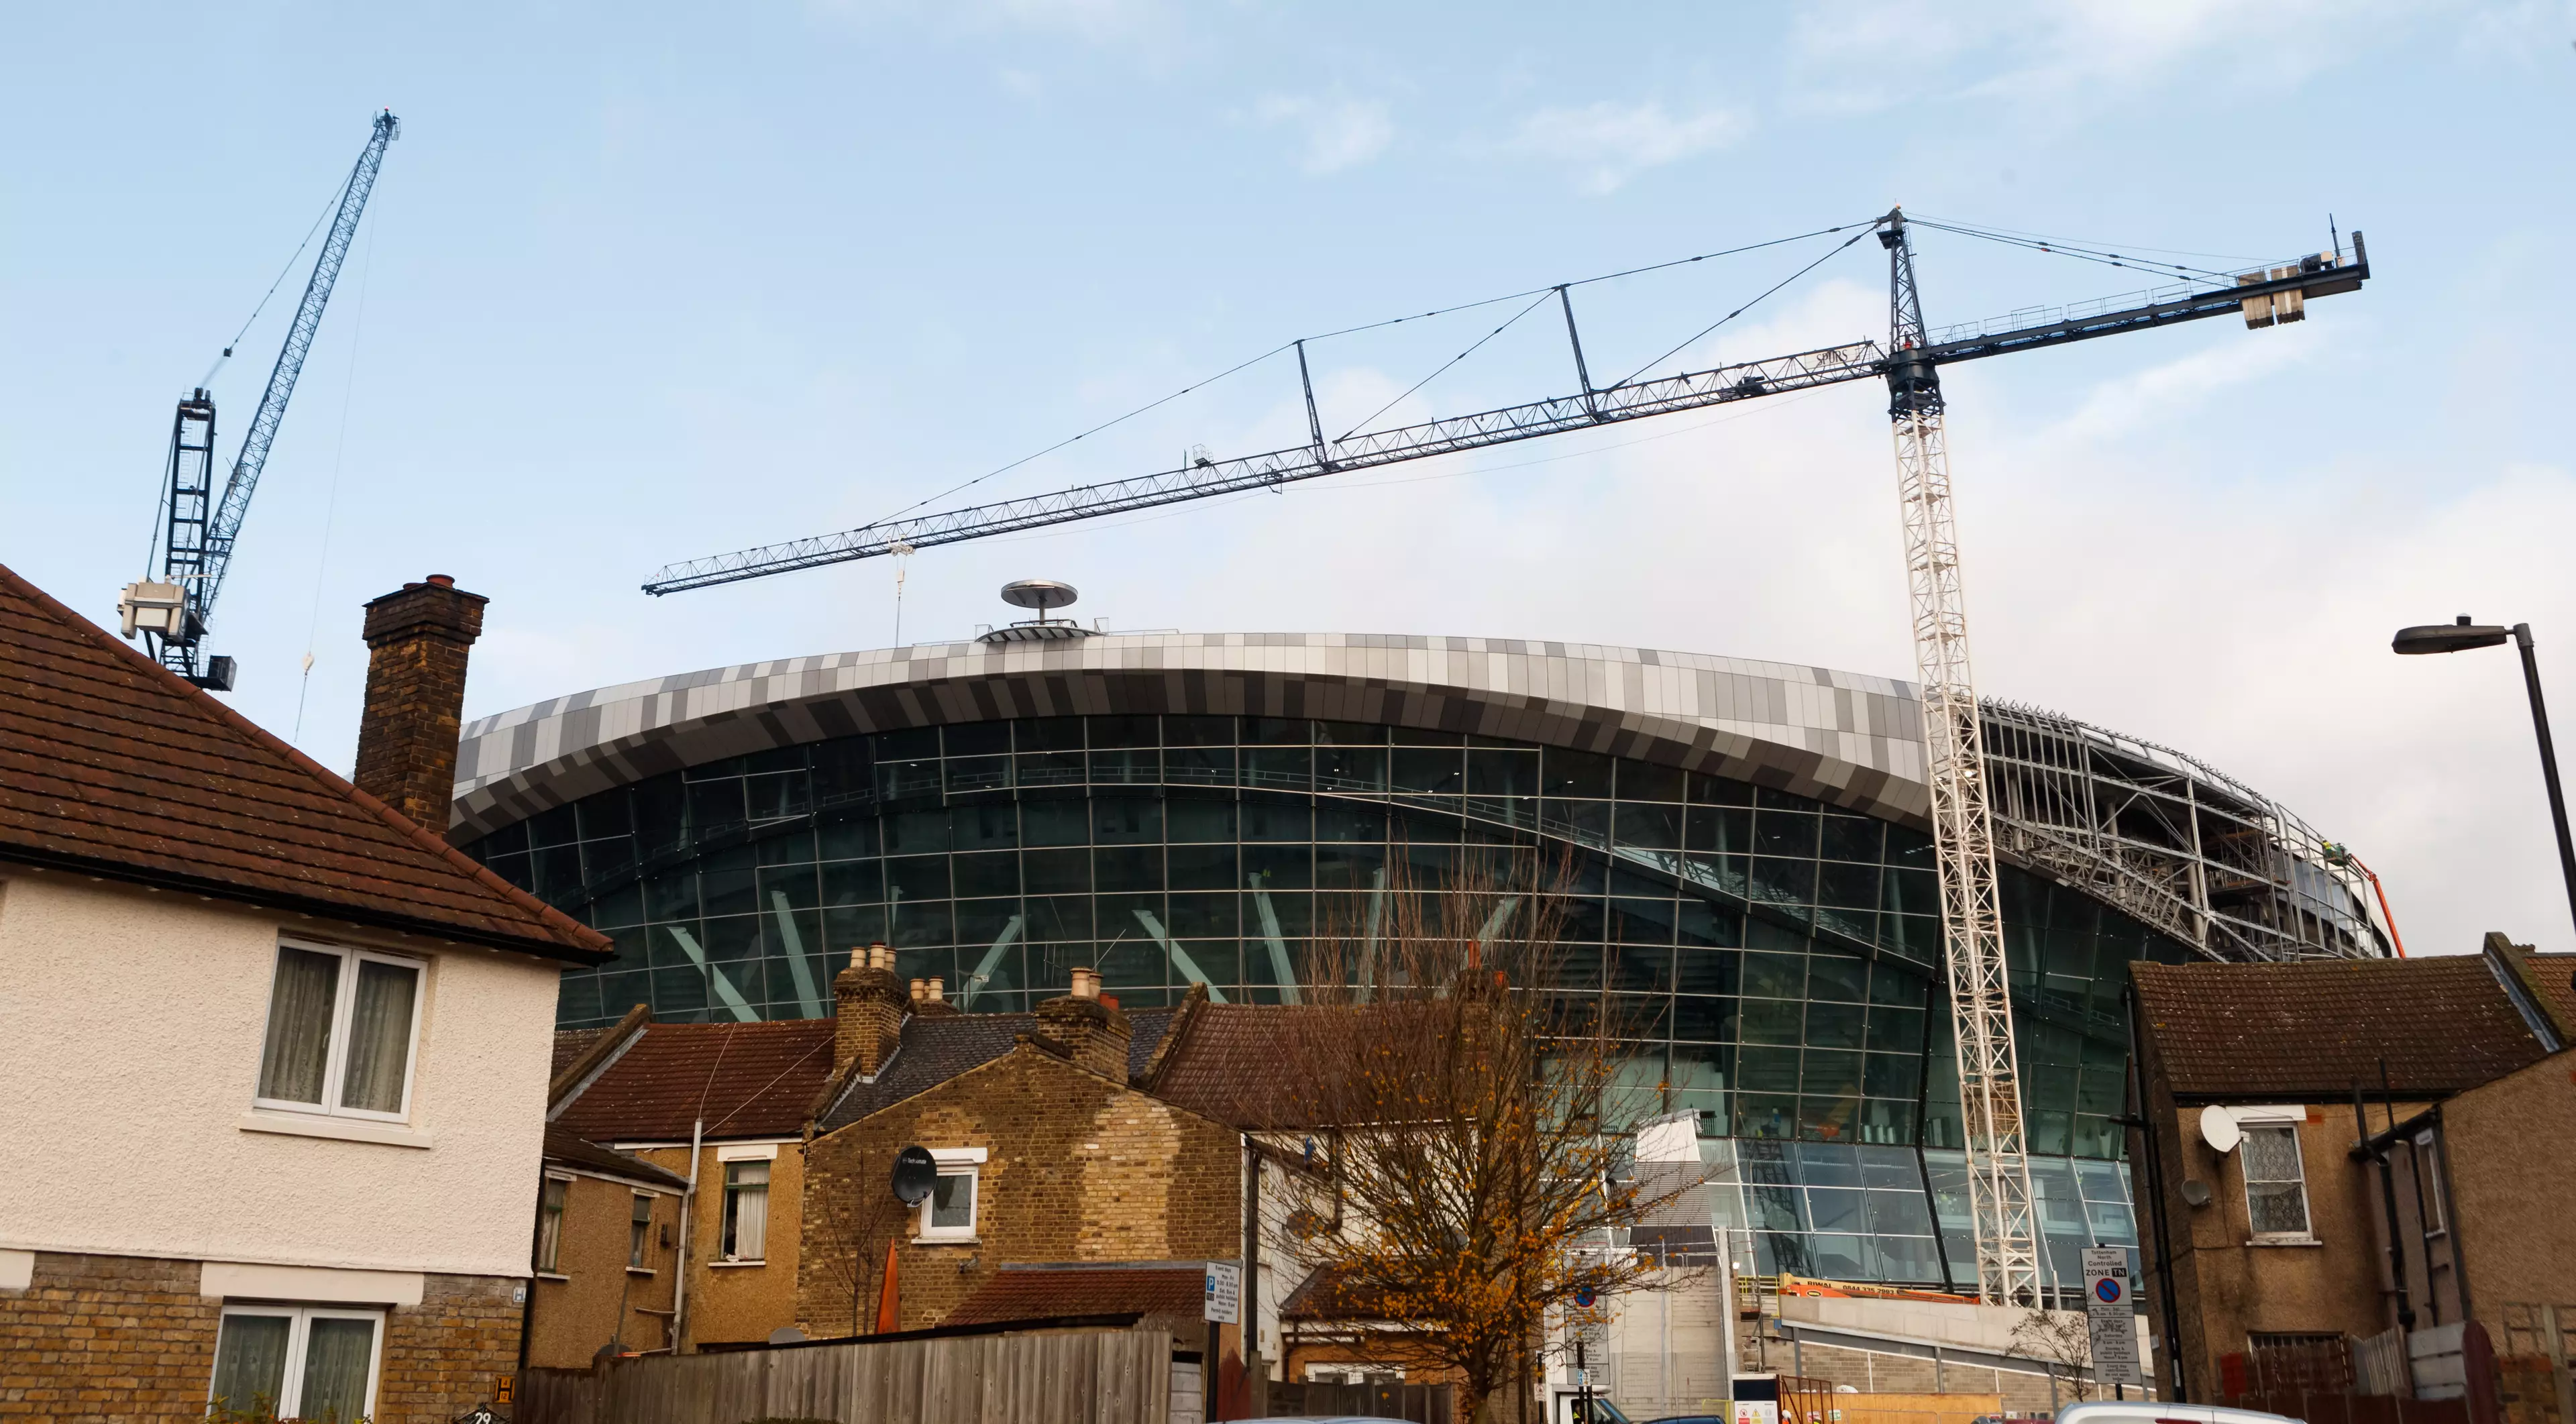 Will this stadium ever be ready? Image: PA Images